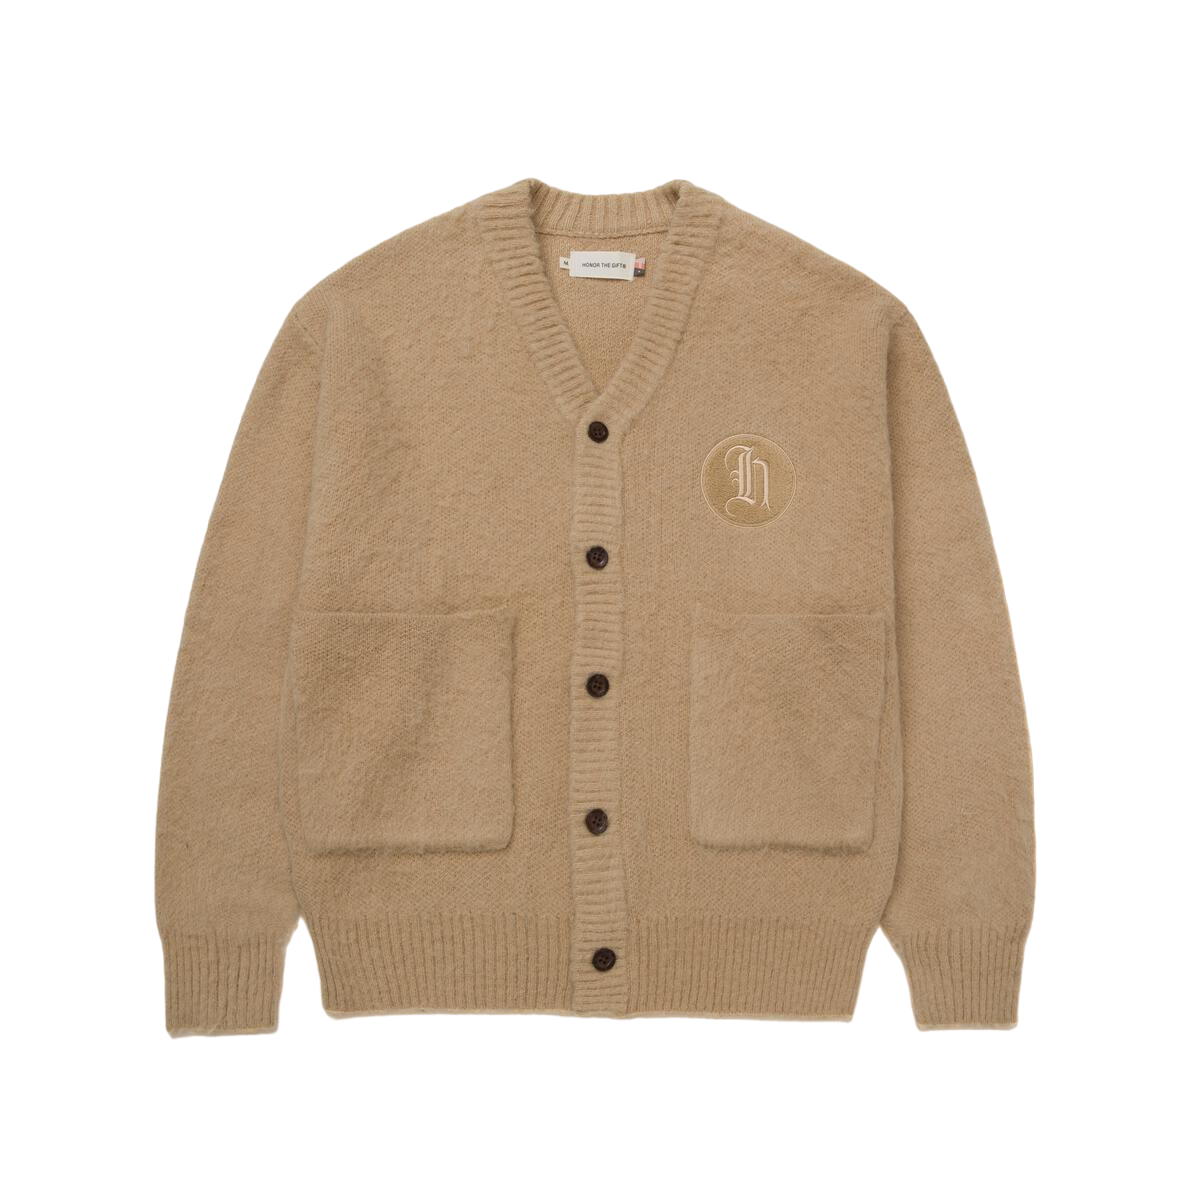 Honor The Gift "C-Fall" Stamped Patch Cardigan - Tan